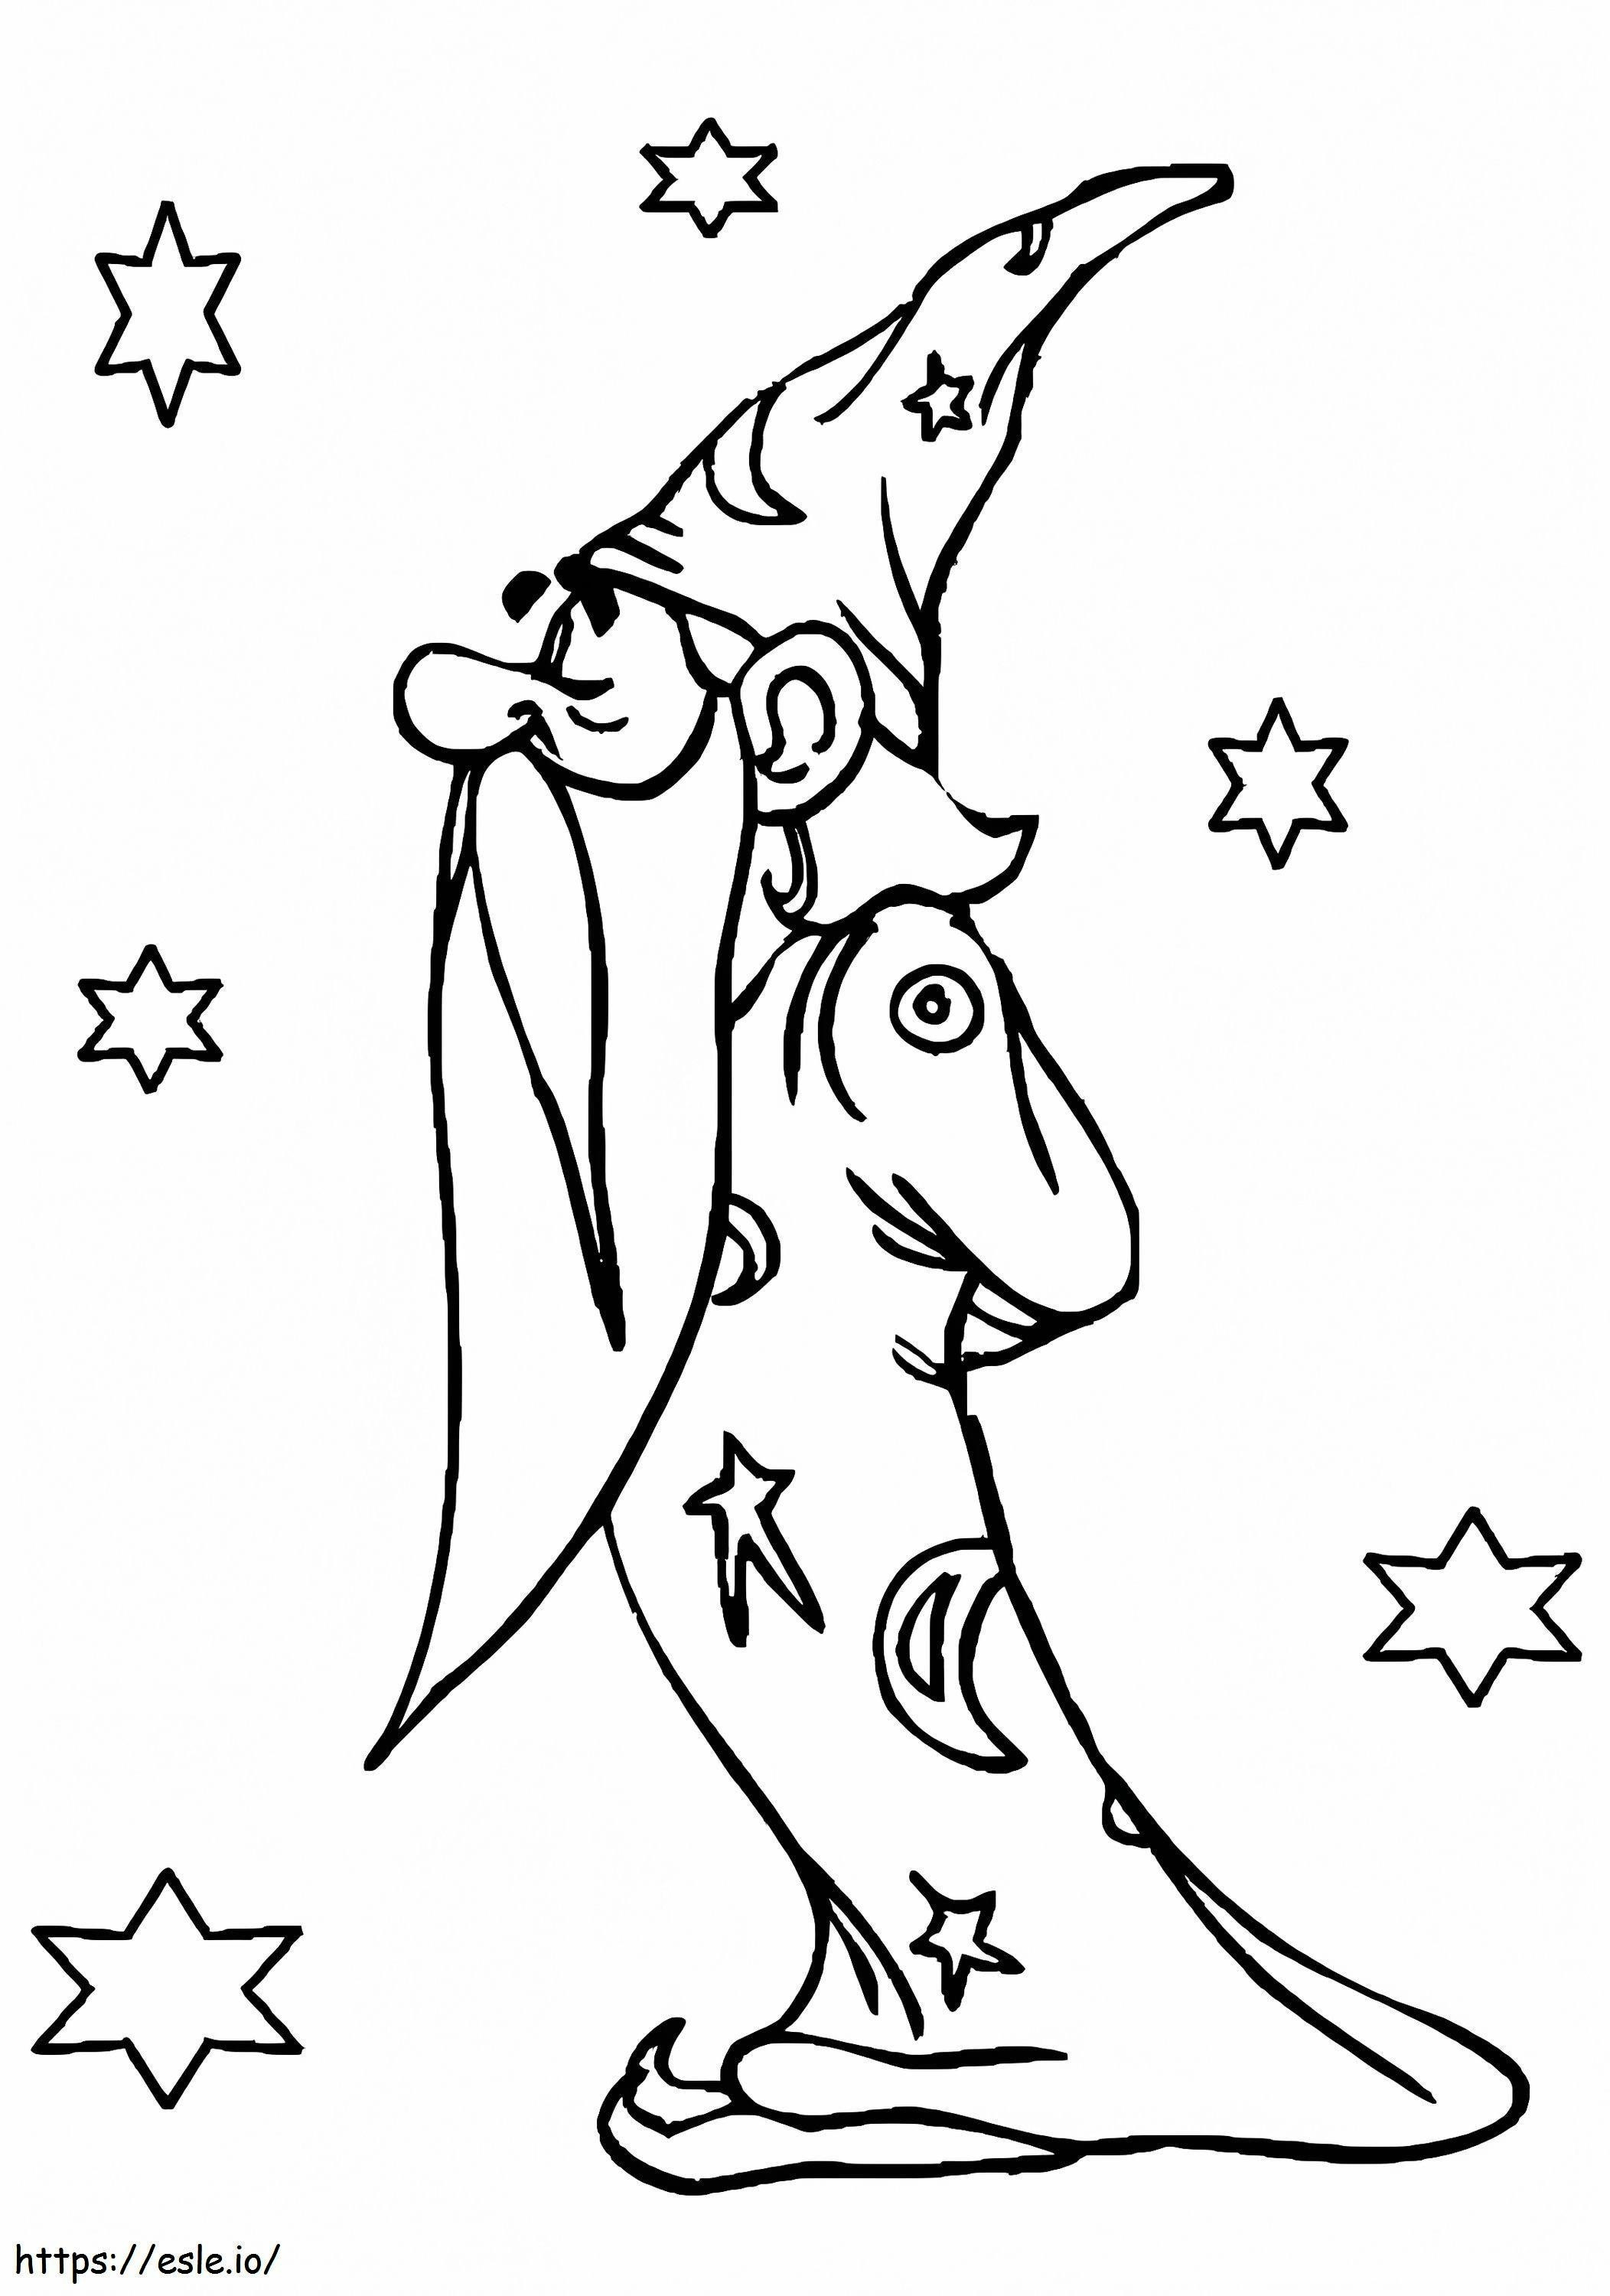 Magic Wizard 6 coloring page